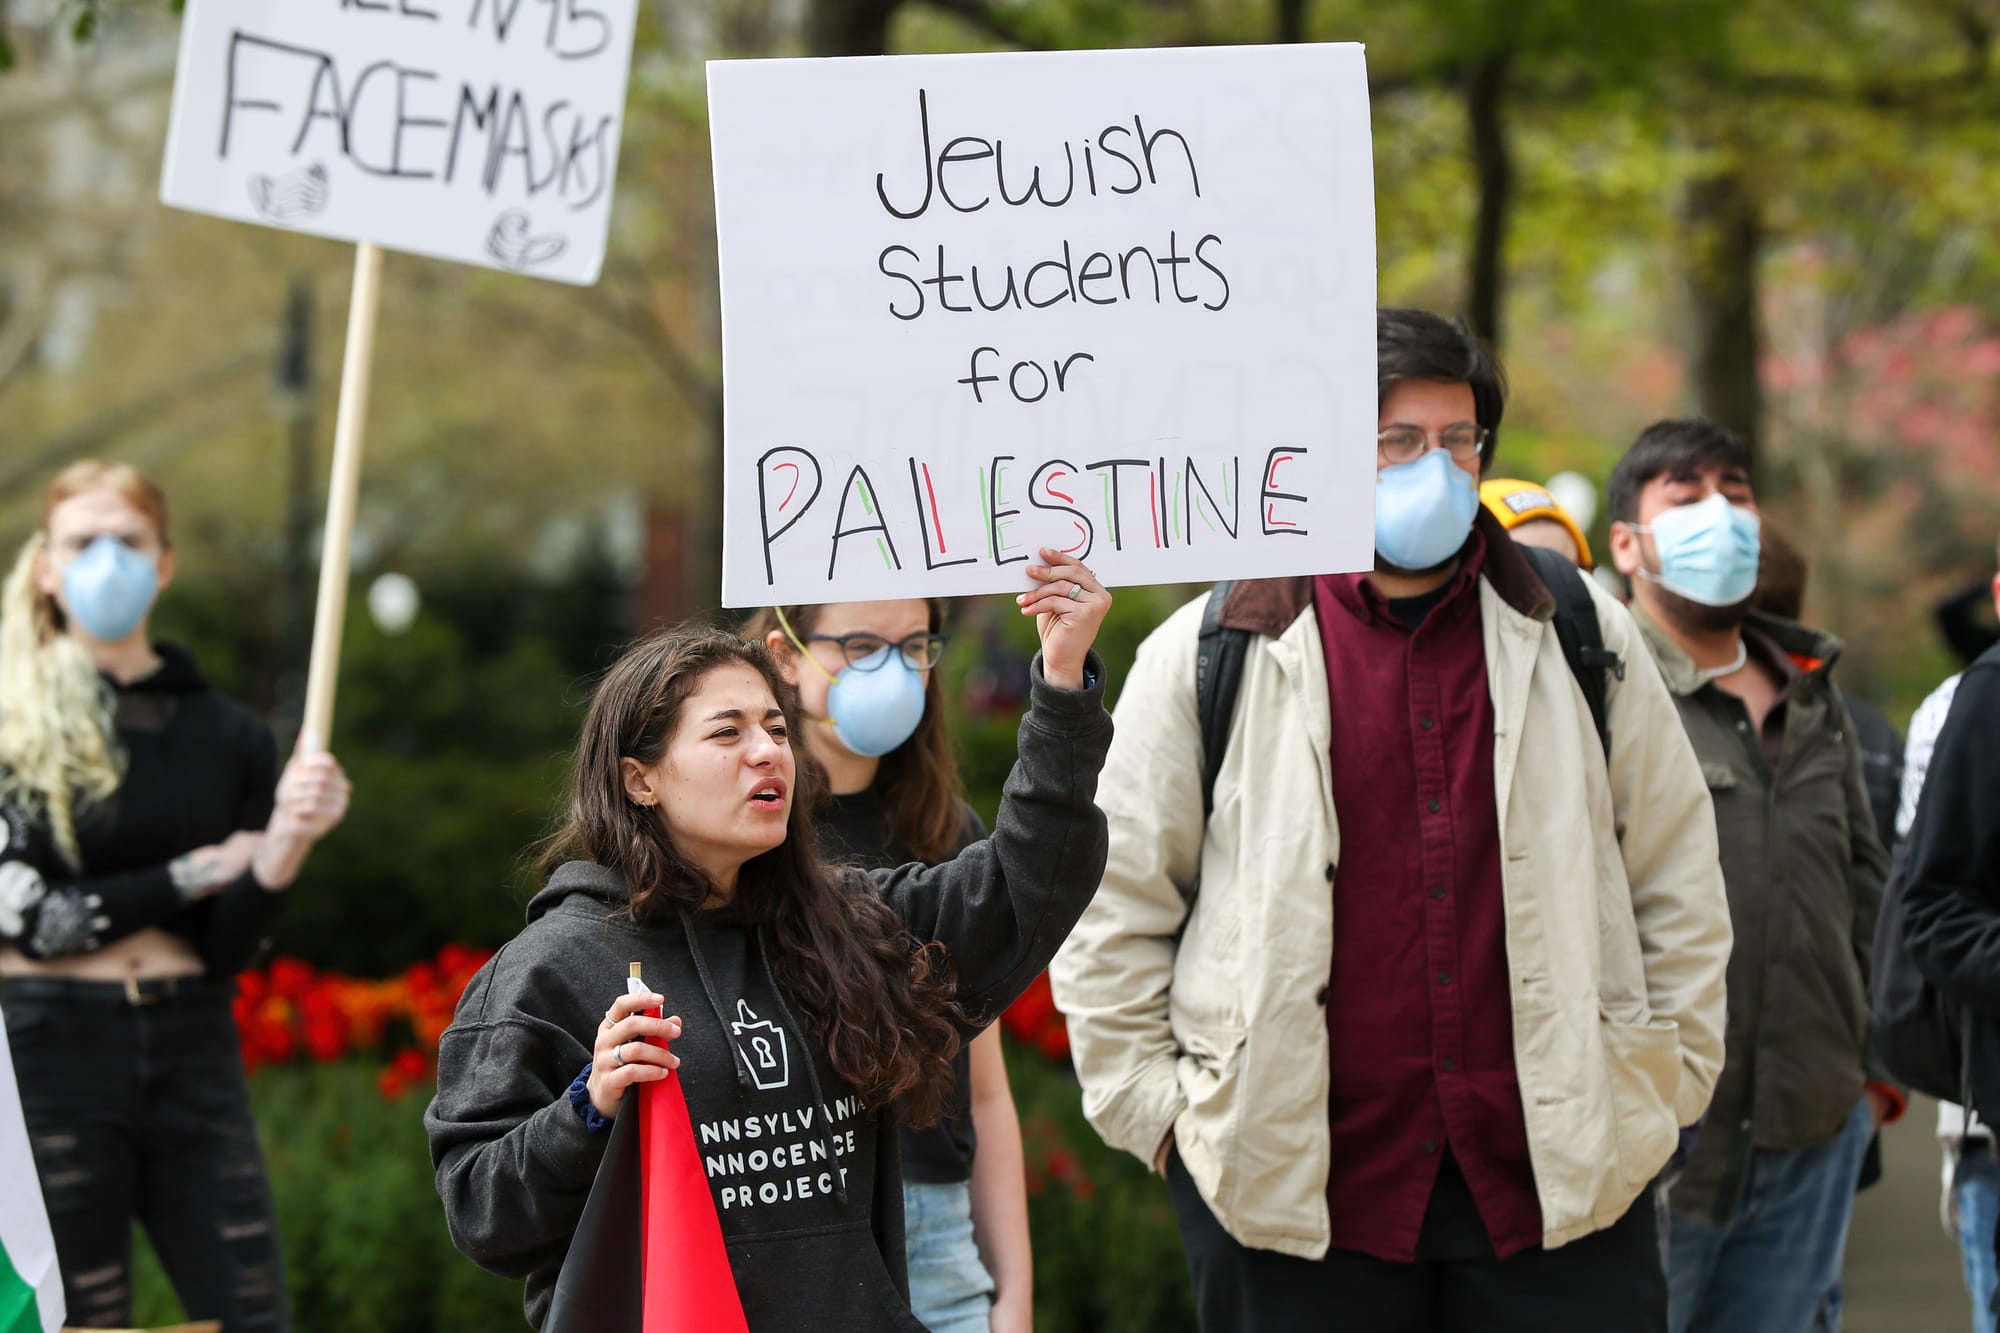 A Jewish Student Speaks Out from Free Gaza Encampment